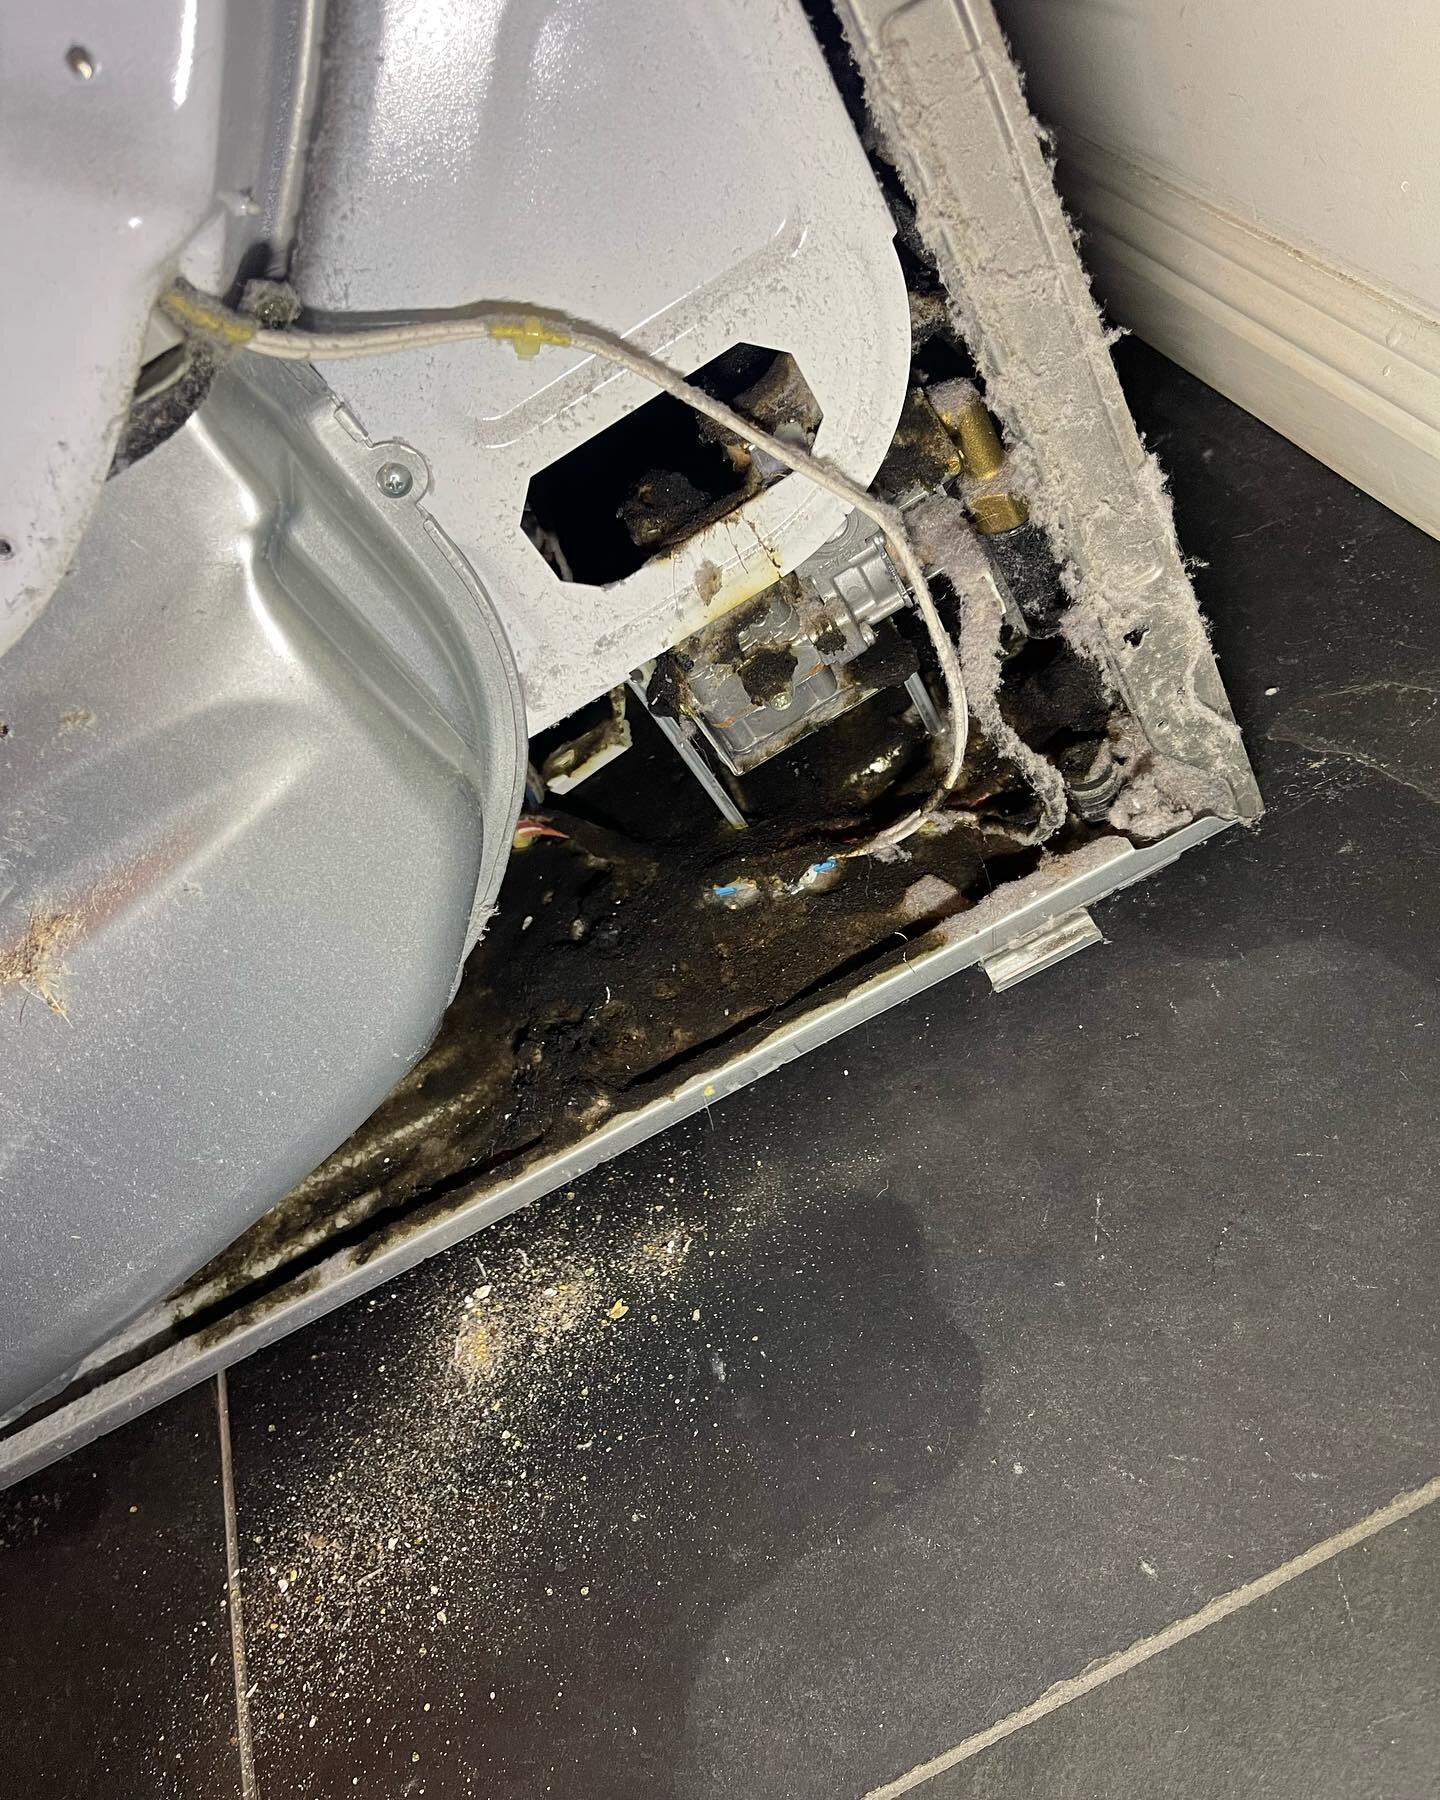 To avoid fire in your home, always do maintenance of your dryer on time.
In this case, dryer caught fire.